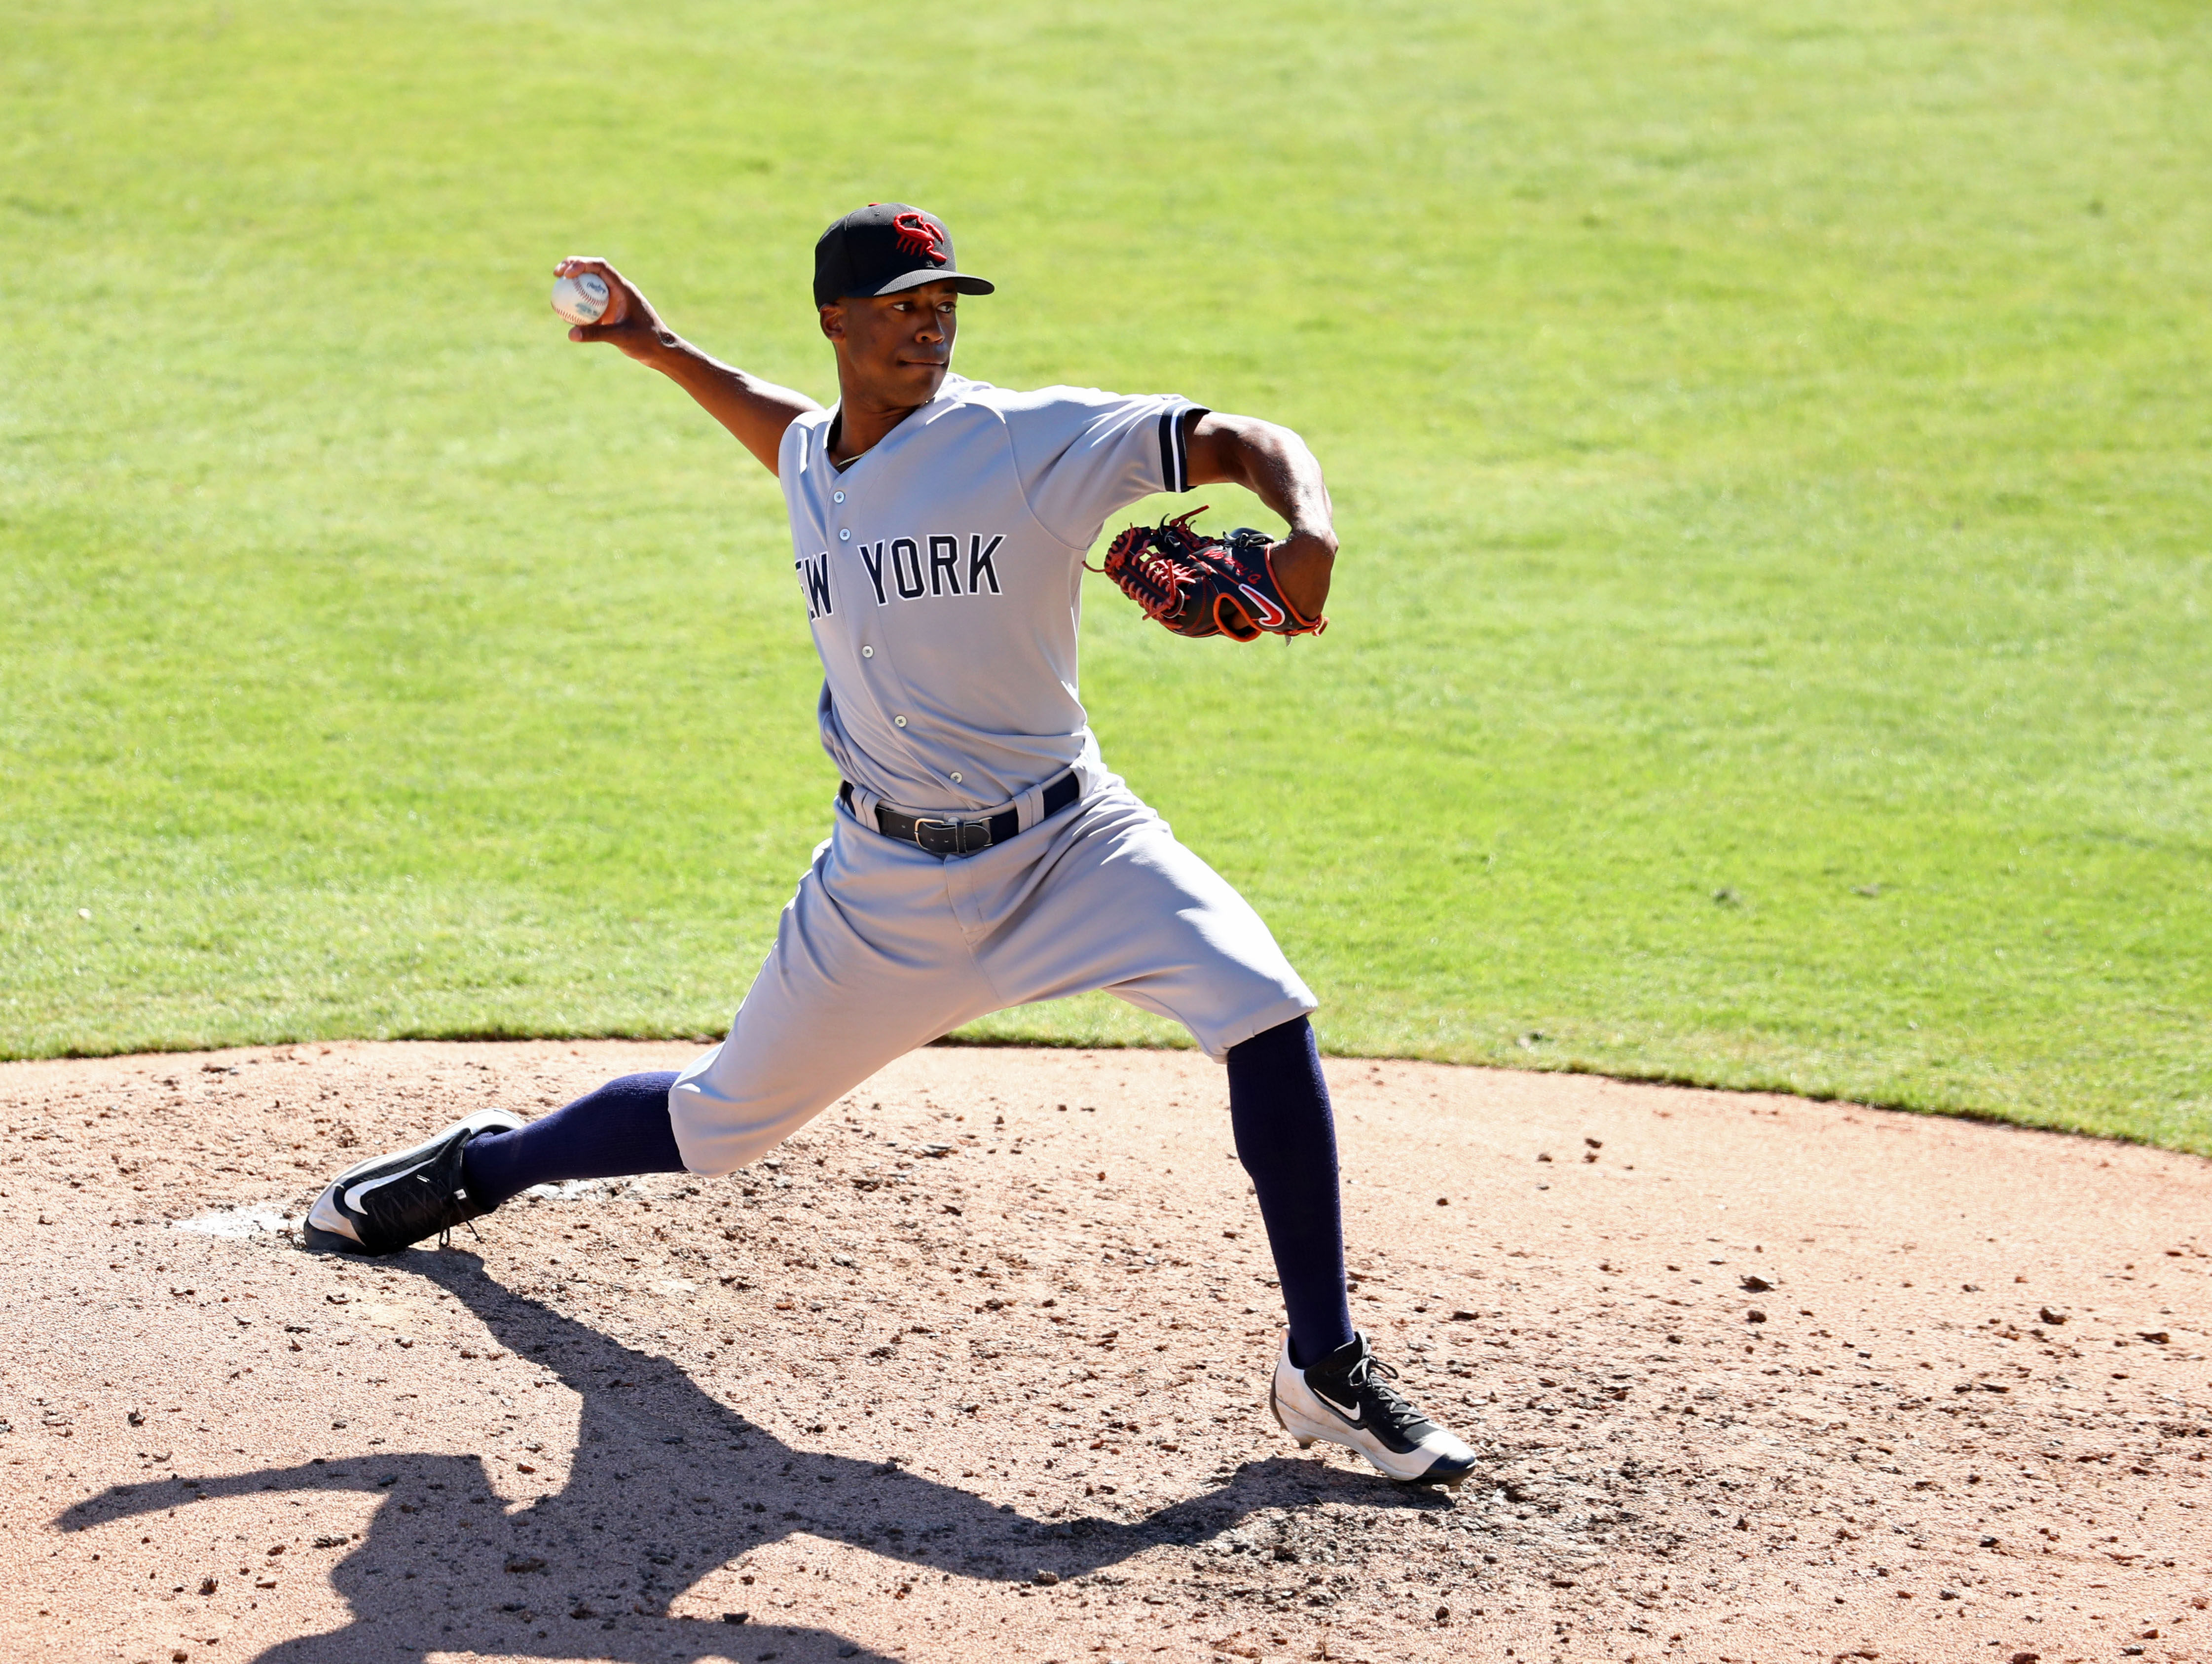 Two New York Yankees Prospects Named To AFL All-Star Team 